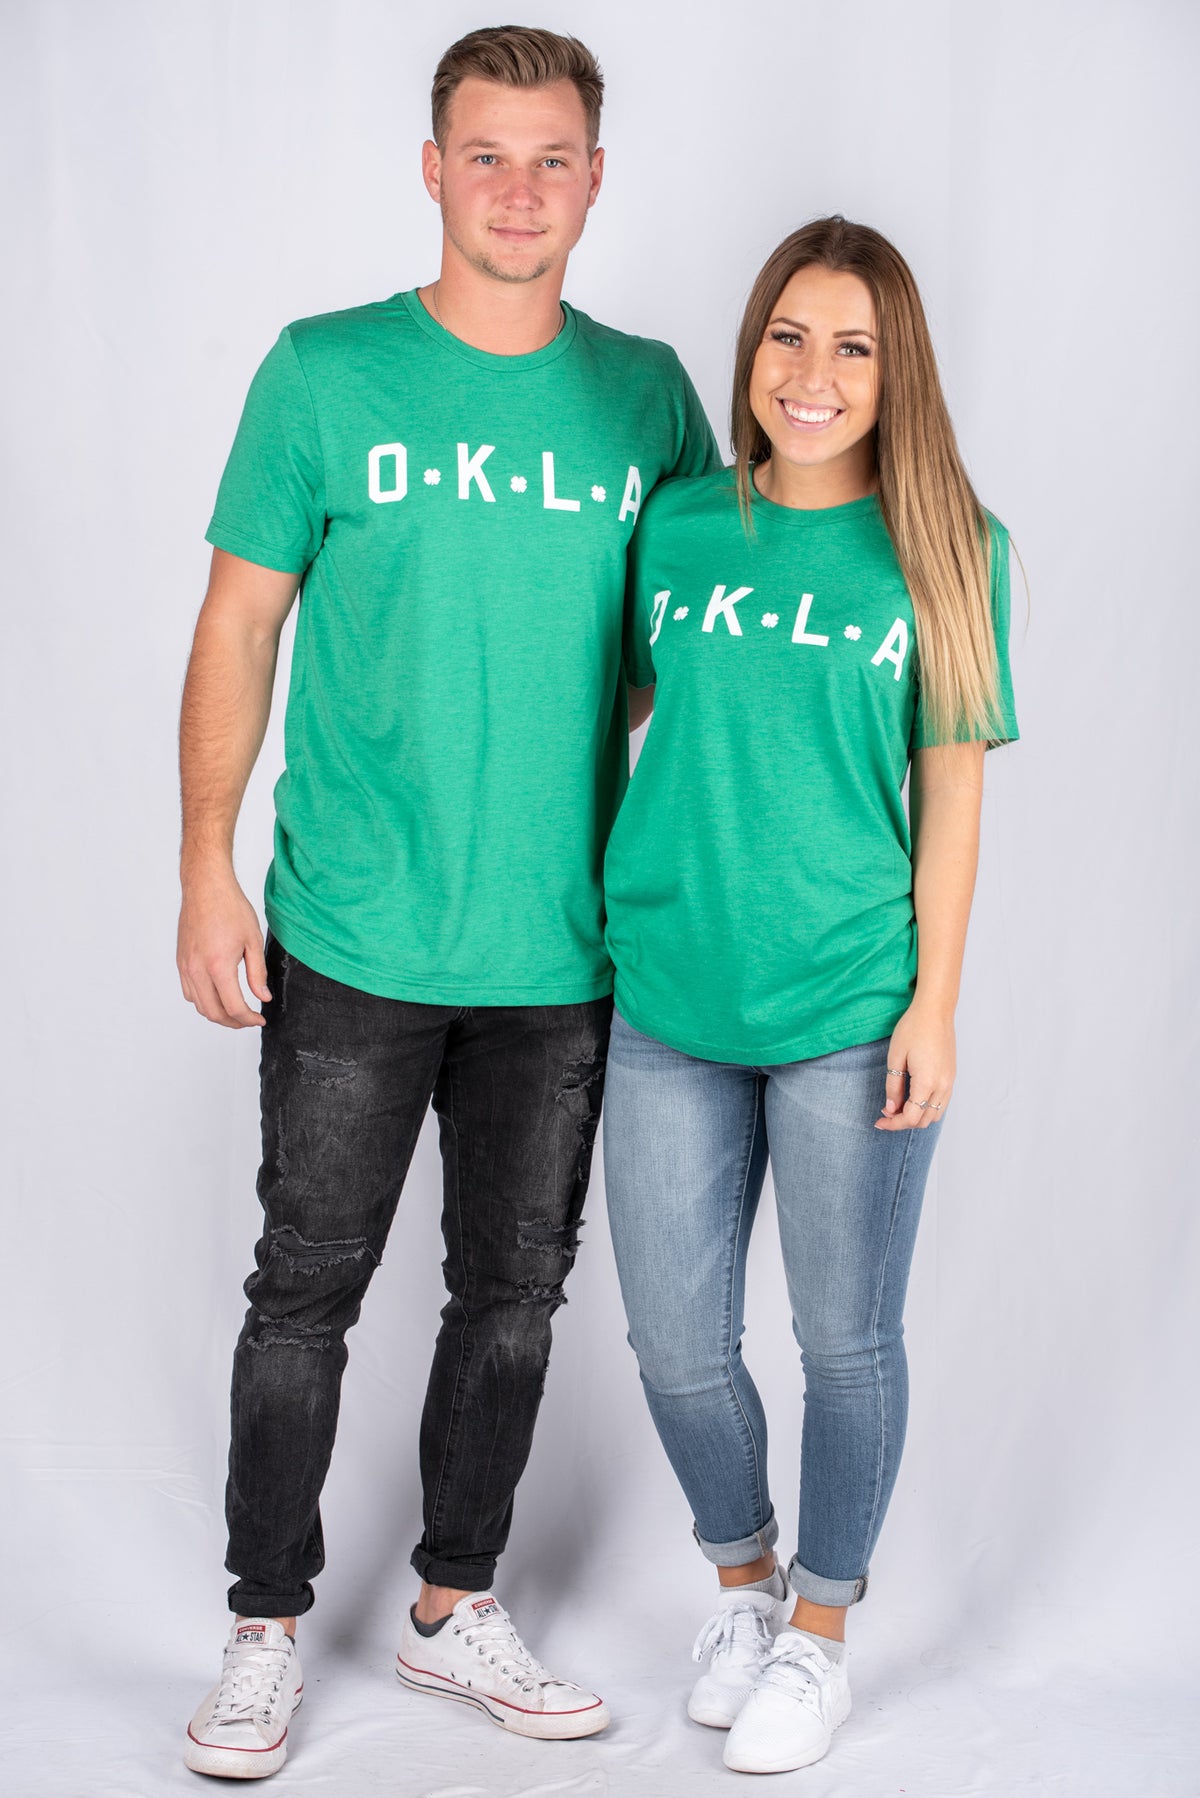 OKLA clovers unisex short sleeve t-shirt green - Cute T-shirts - Trendy Graphic T-Shirts at Lush Fashion Lounge Boutique in Oklahoma City